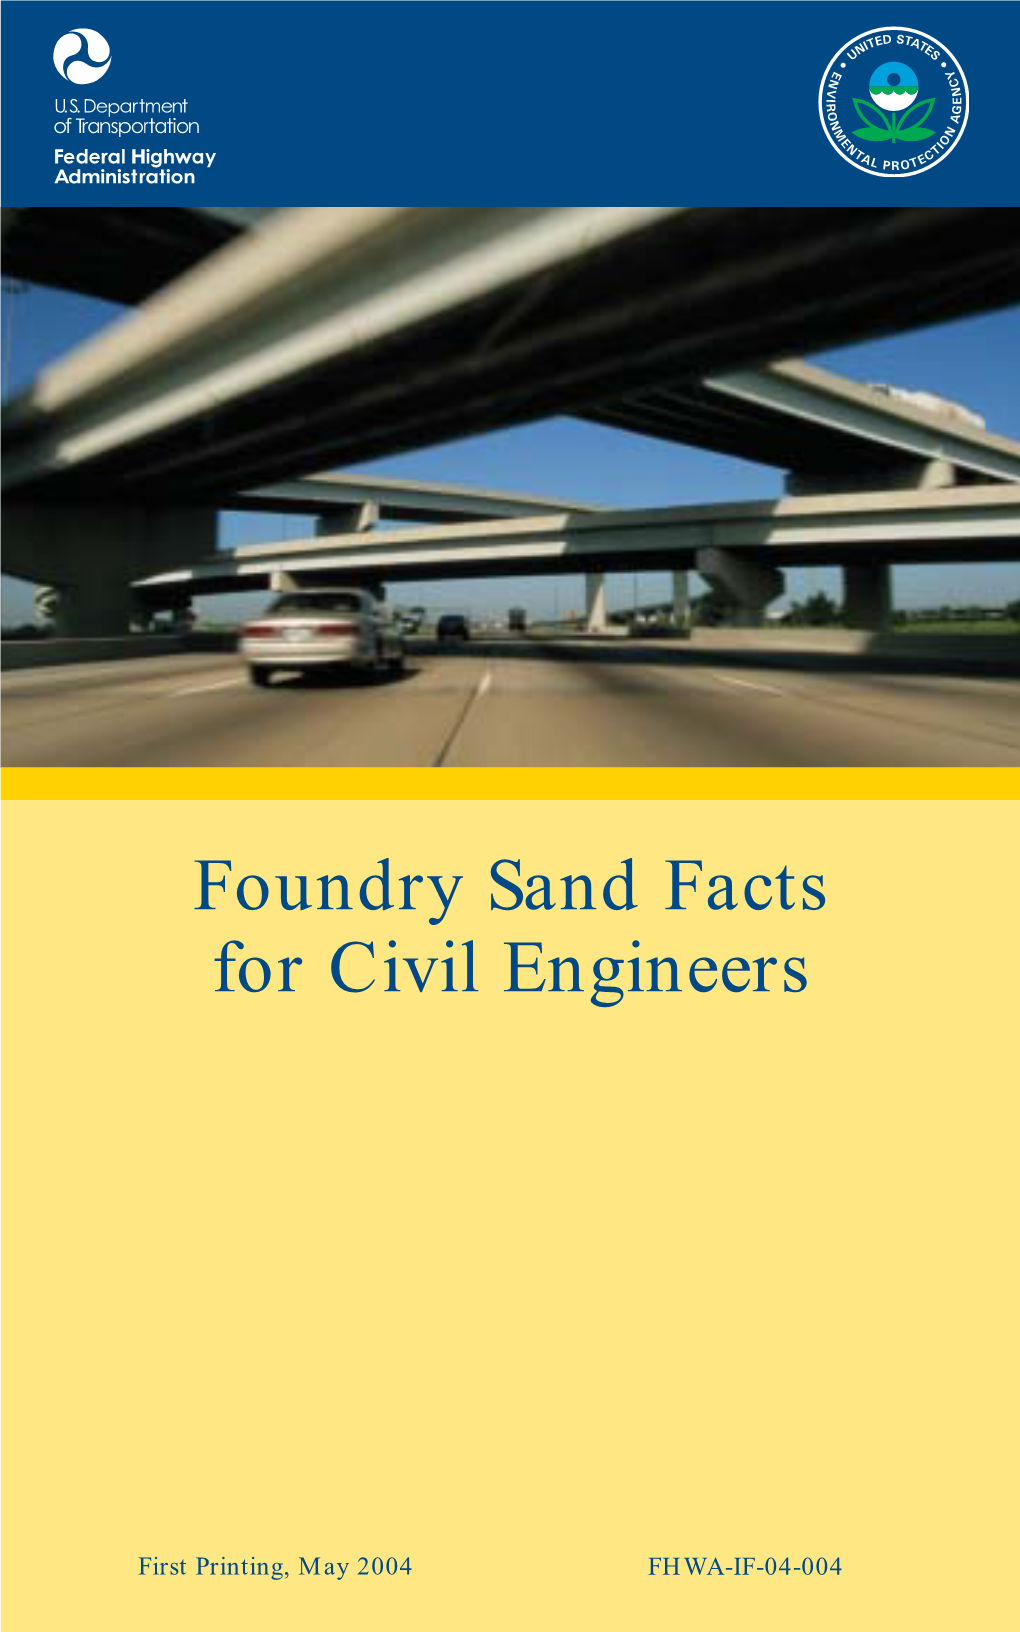 Foundry Sand Facts for Civil Engineers